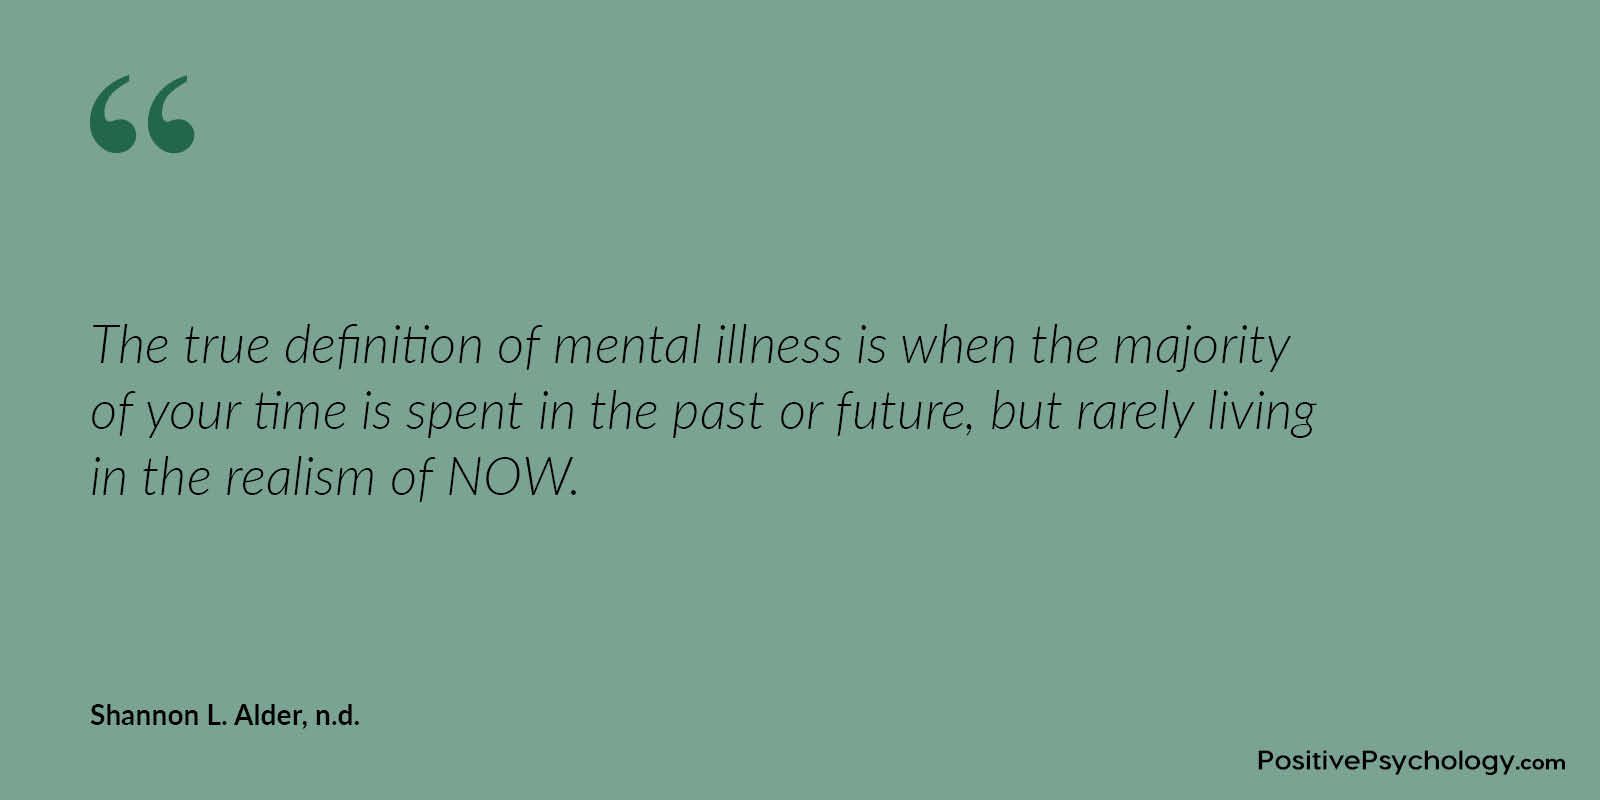 28 Inspiring Mental Health Quotes That Will Empower You